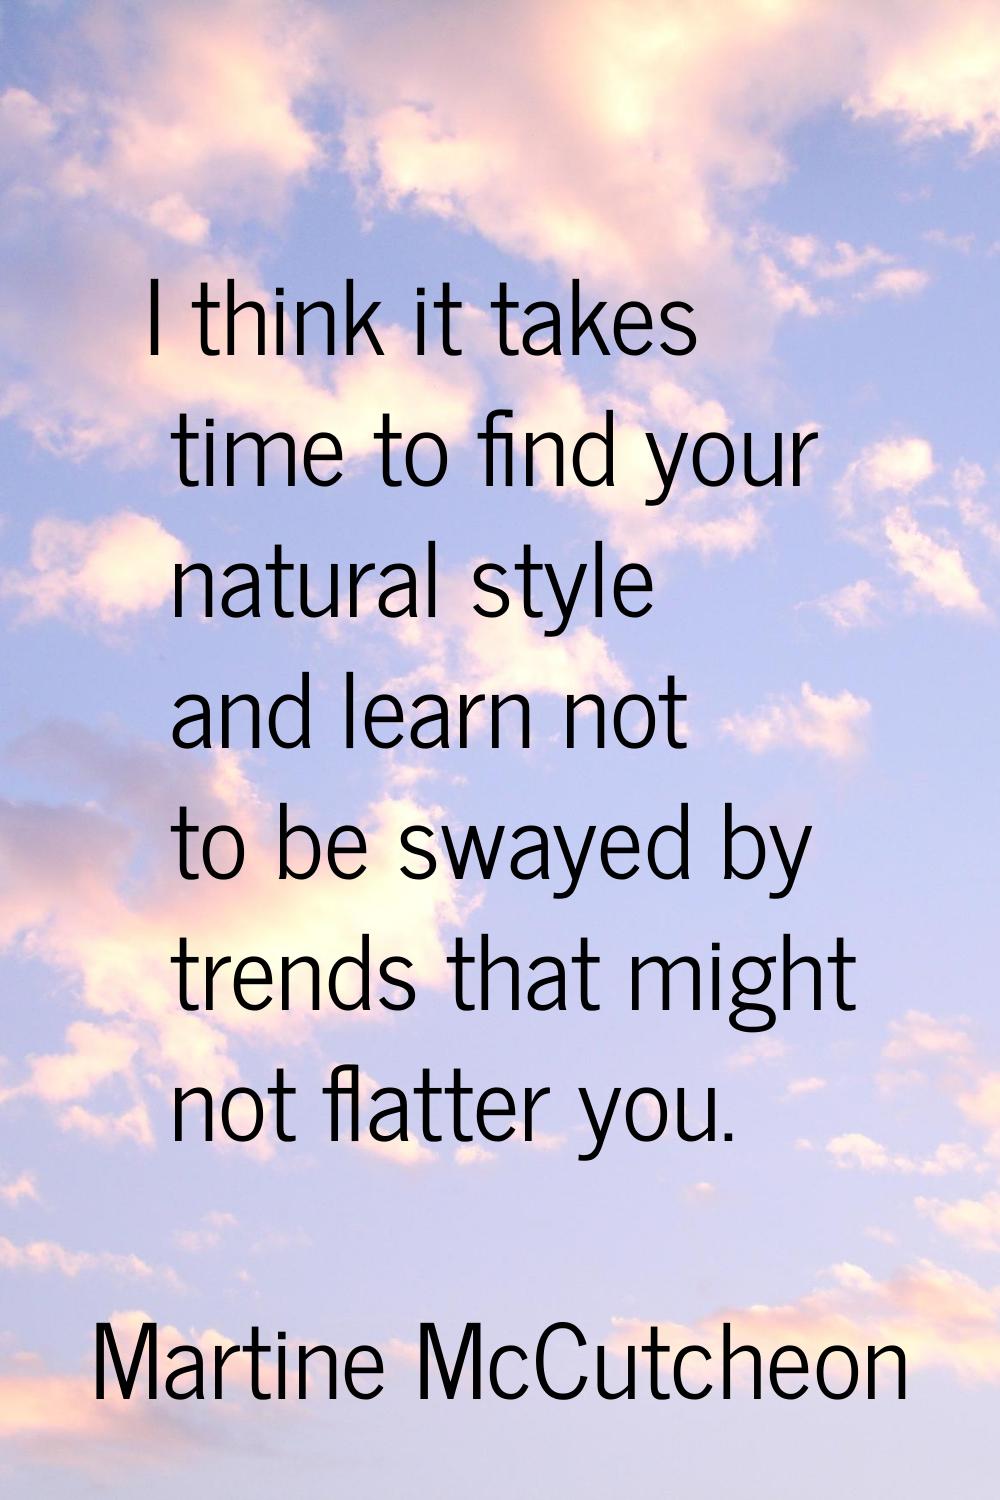 I think it takes time to find your natural style and learn not to be swayed by trends that might no